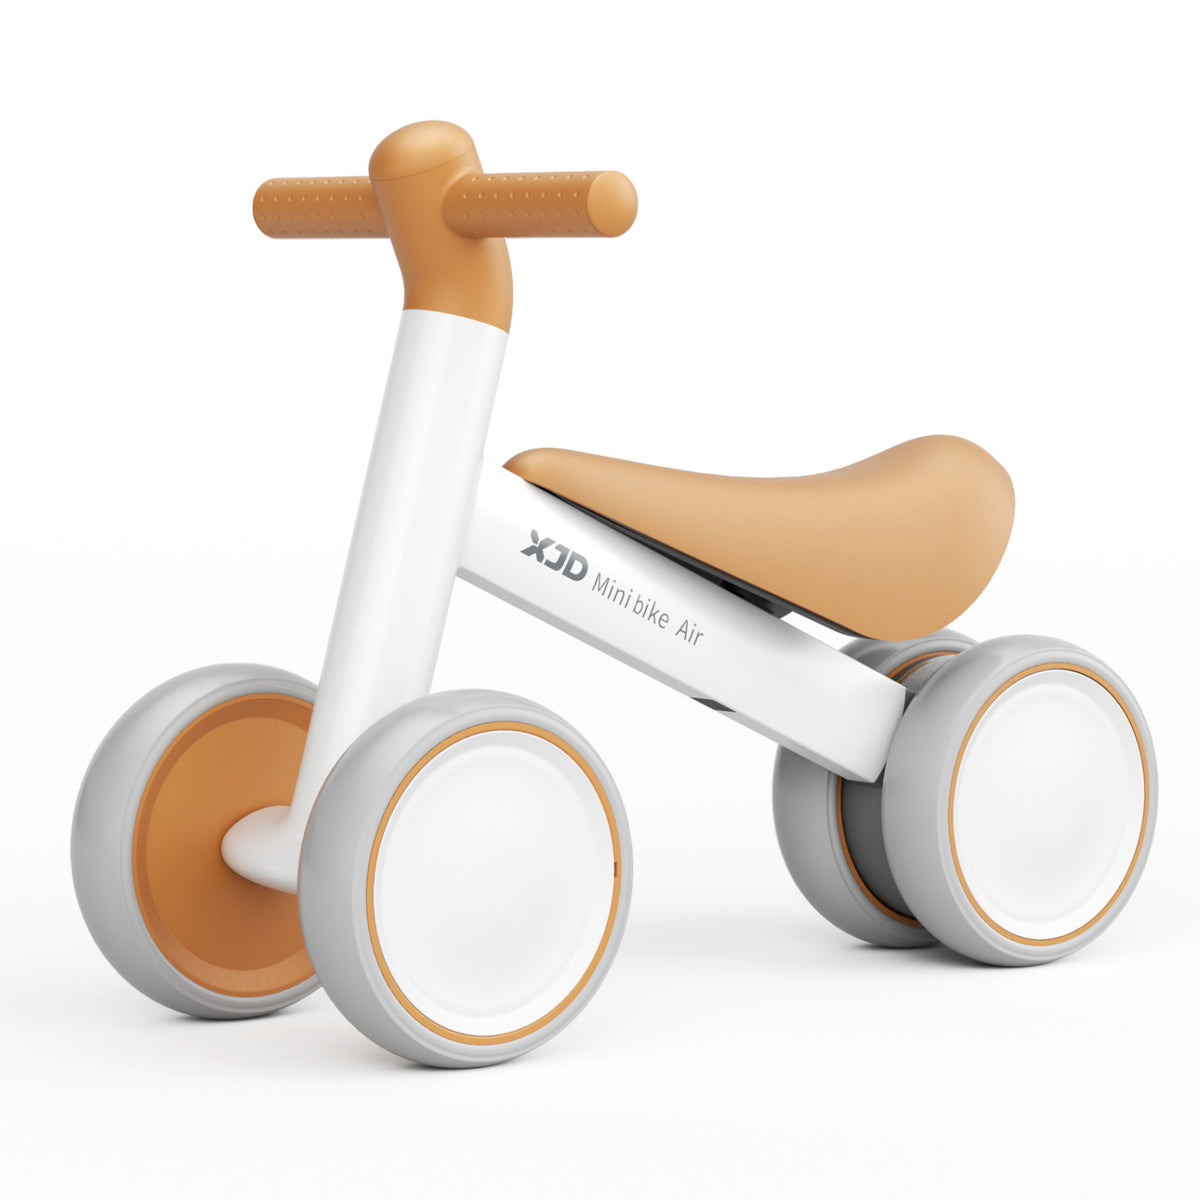 XJD Baby Balance Bike, 4 Wheels for Toddlers as A Birthday Gift - White Brown